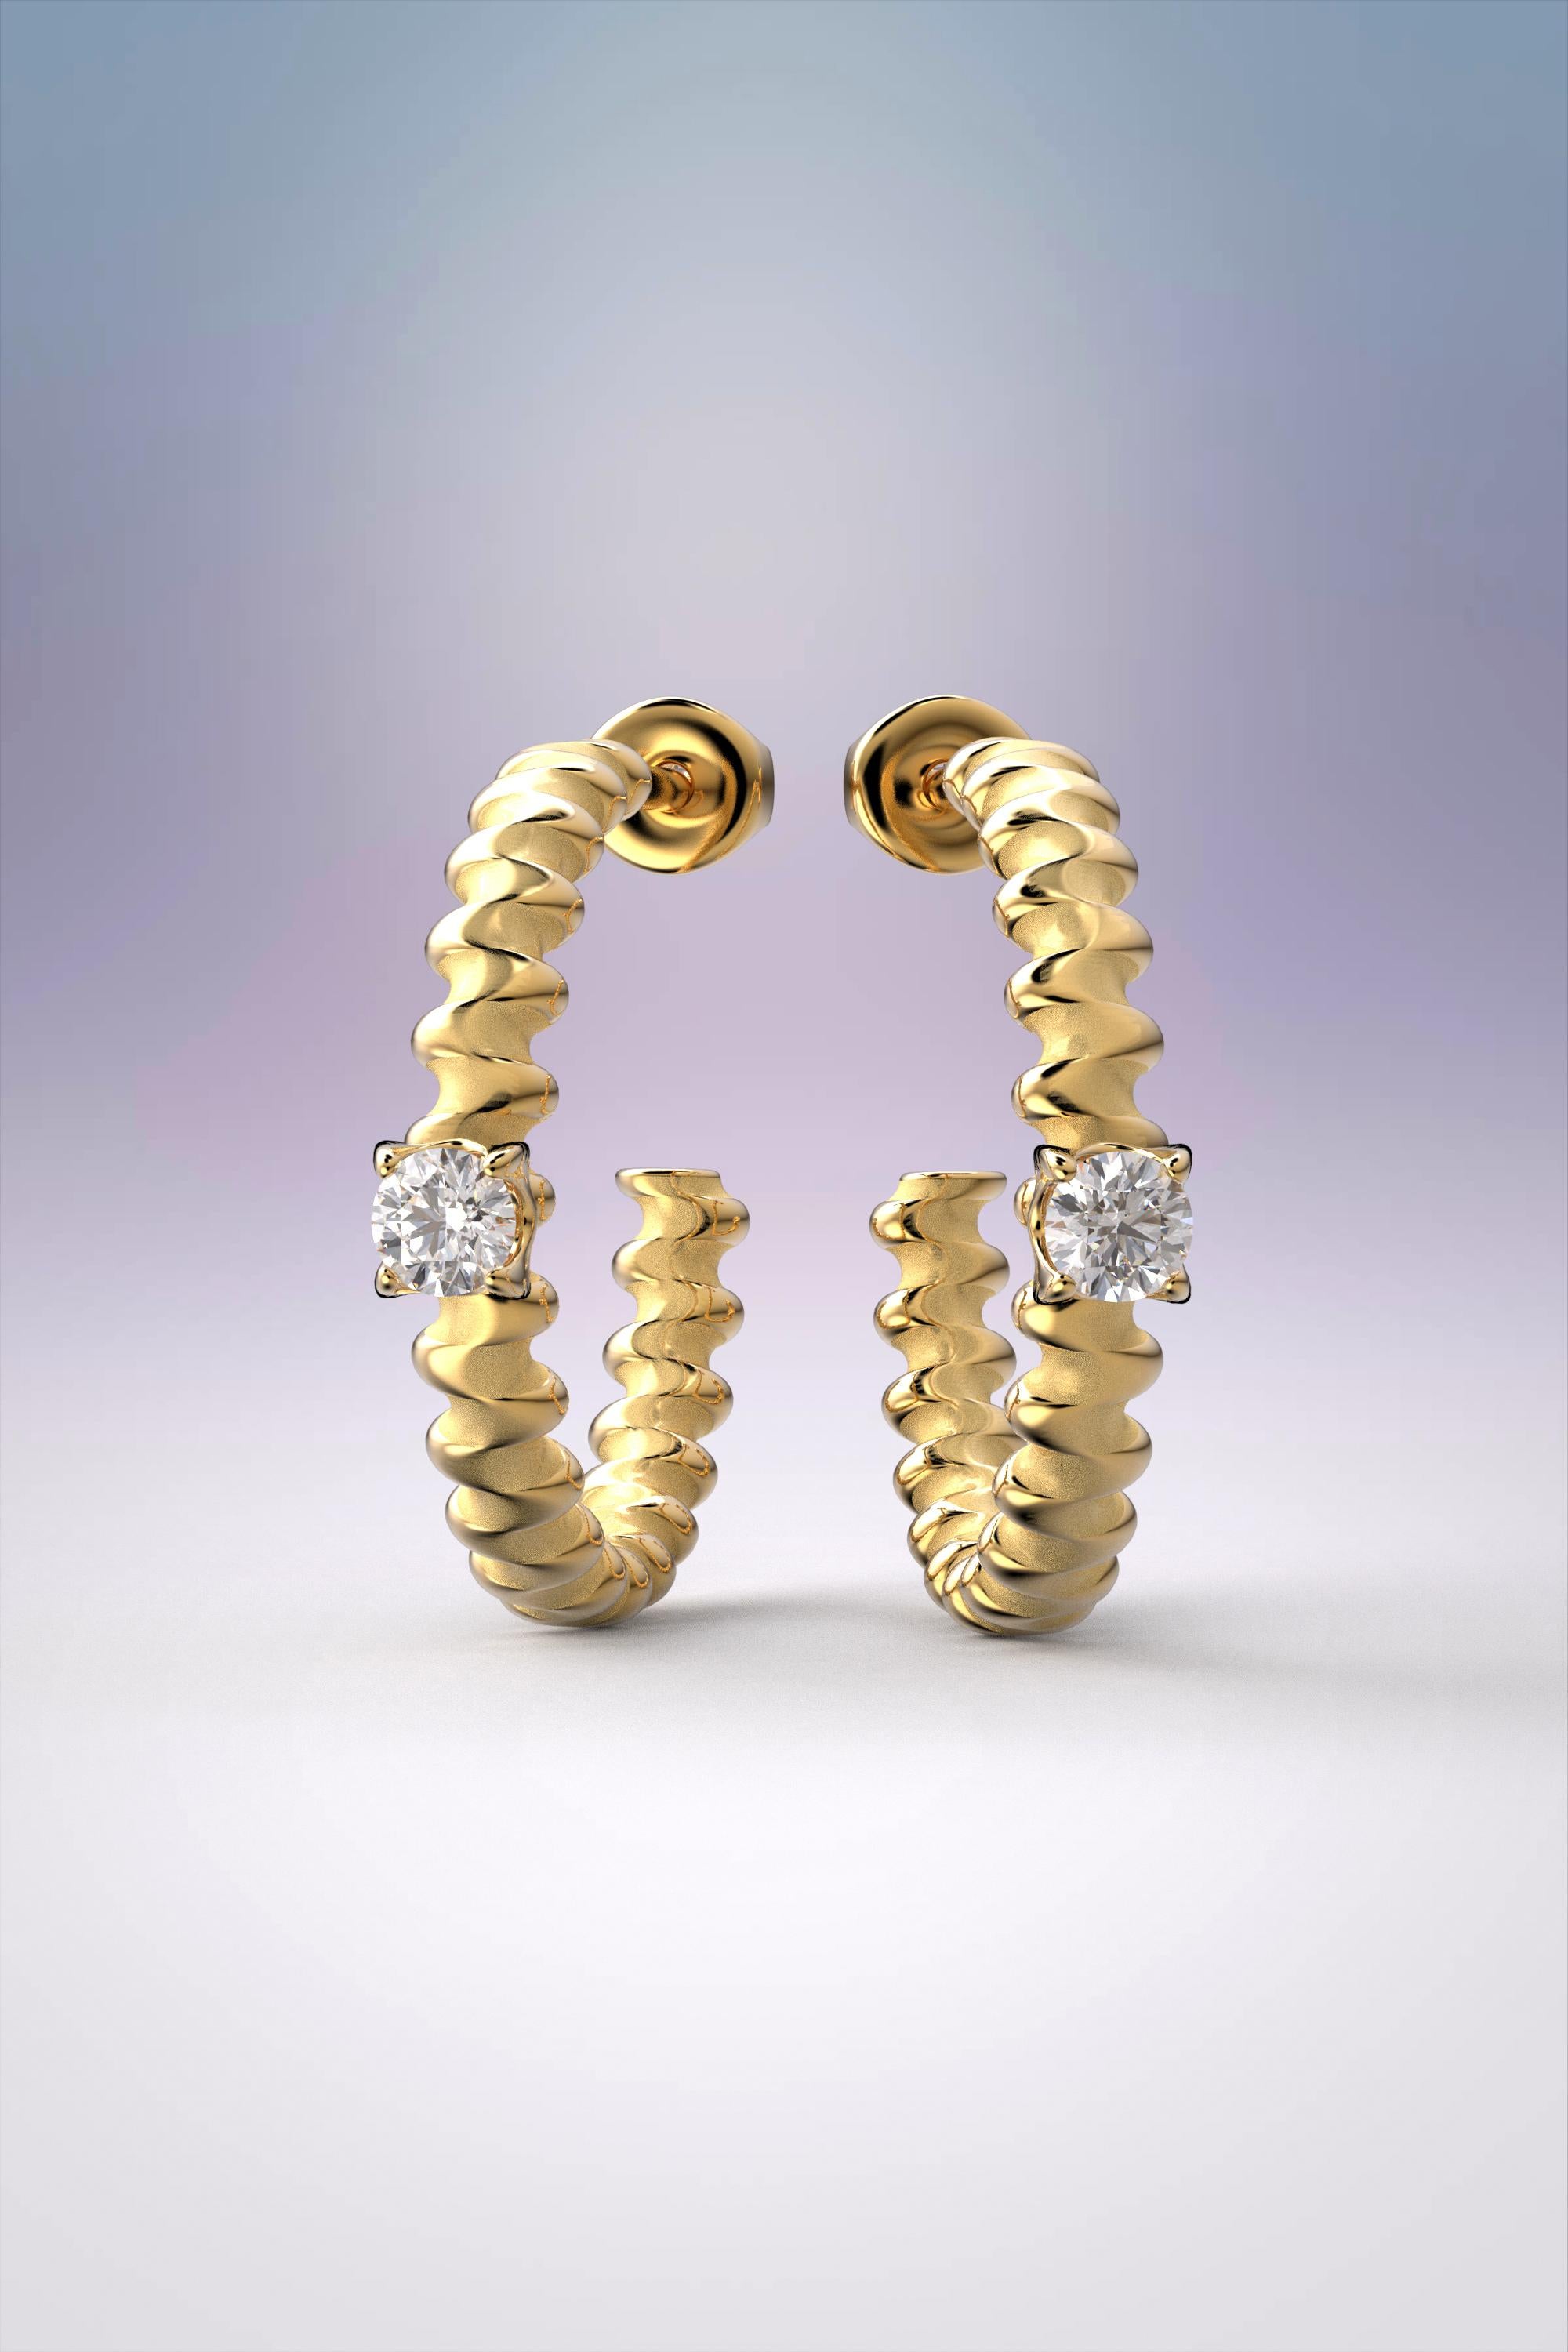 Contemporary Oltremare Gioielli 14k Diamond Gold Hoop Earrings Designed and Crafted in Italy For Sale